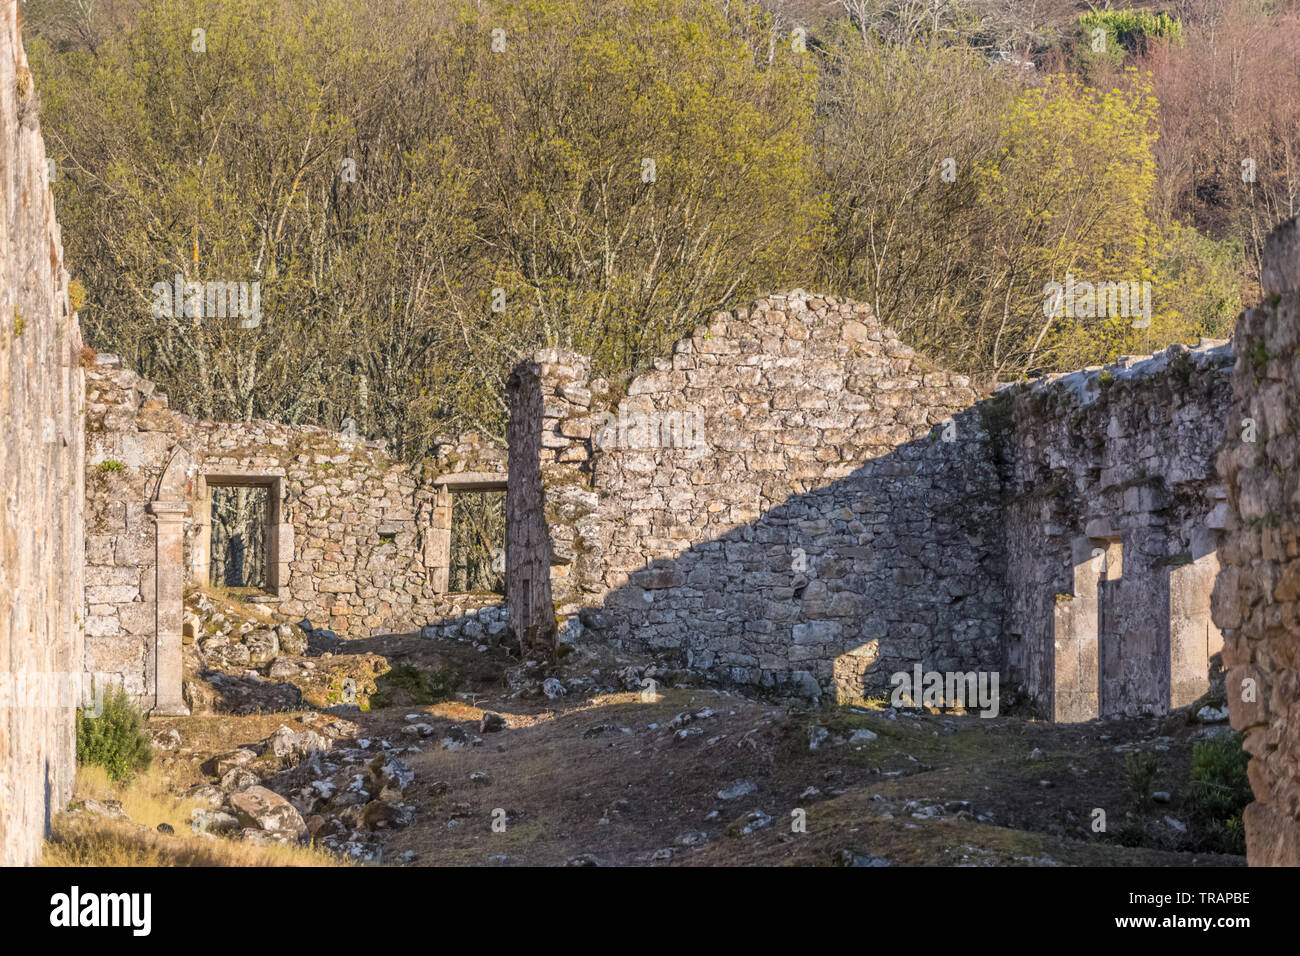 Tarouca / Portugal - 03 15 2018: View of historic building in ruins, inside convent of St. Joao of Tarouca, detail of ruined wall with spans of symmet Stock Photo